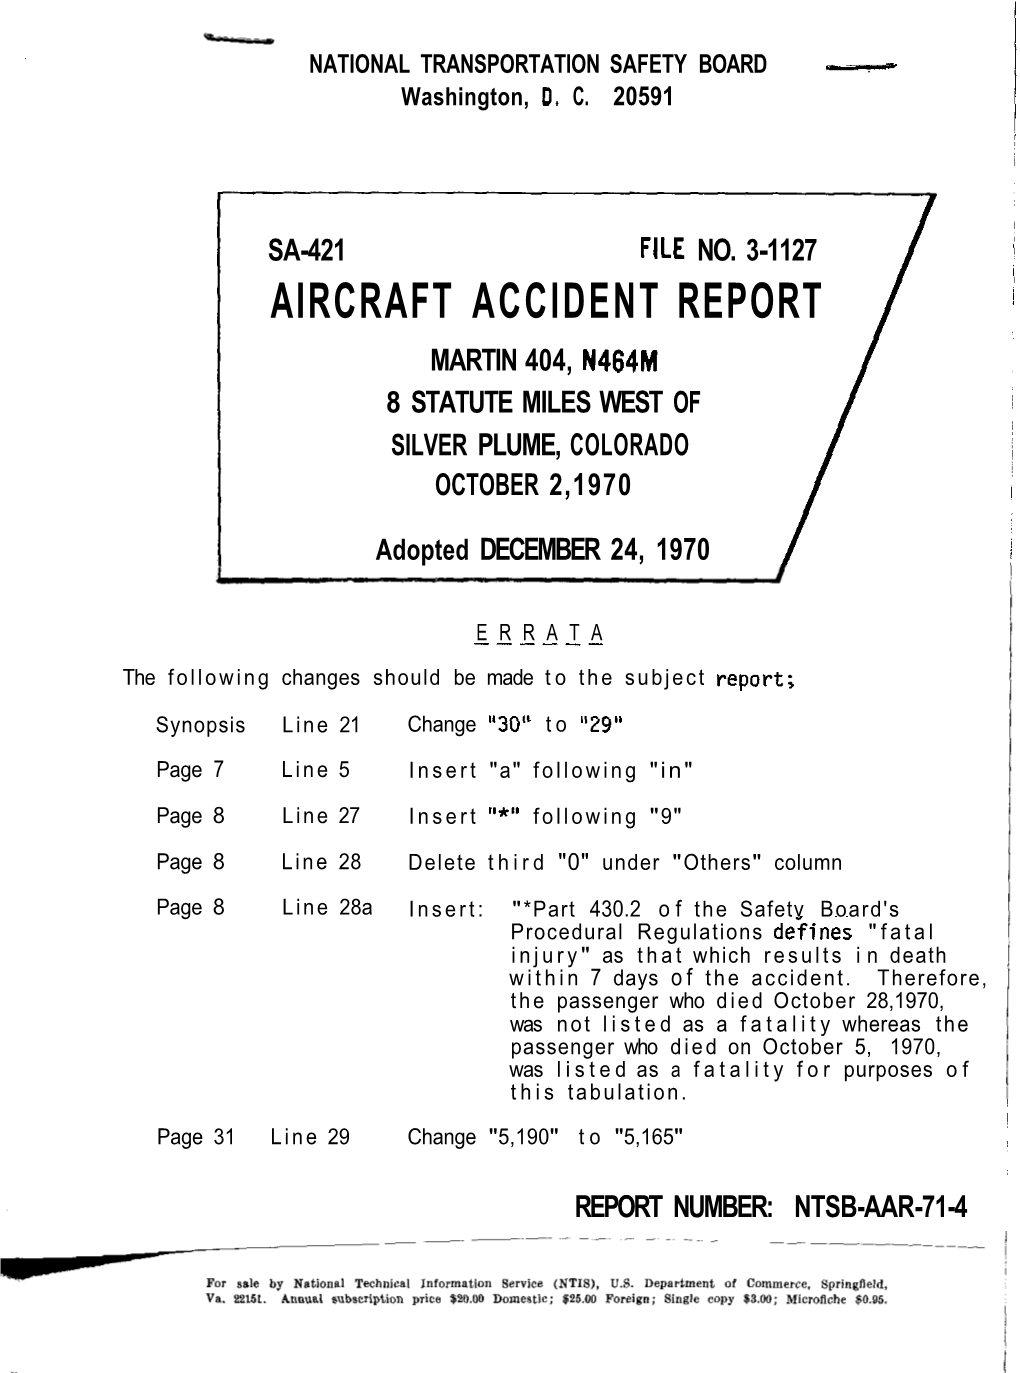 Aircraft Accident Report Martin 404, N464m 8 Statute Miles West of Silver Plume, Colorado October 2,1970